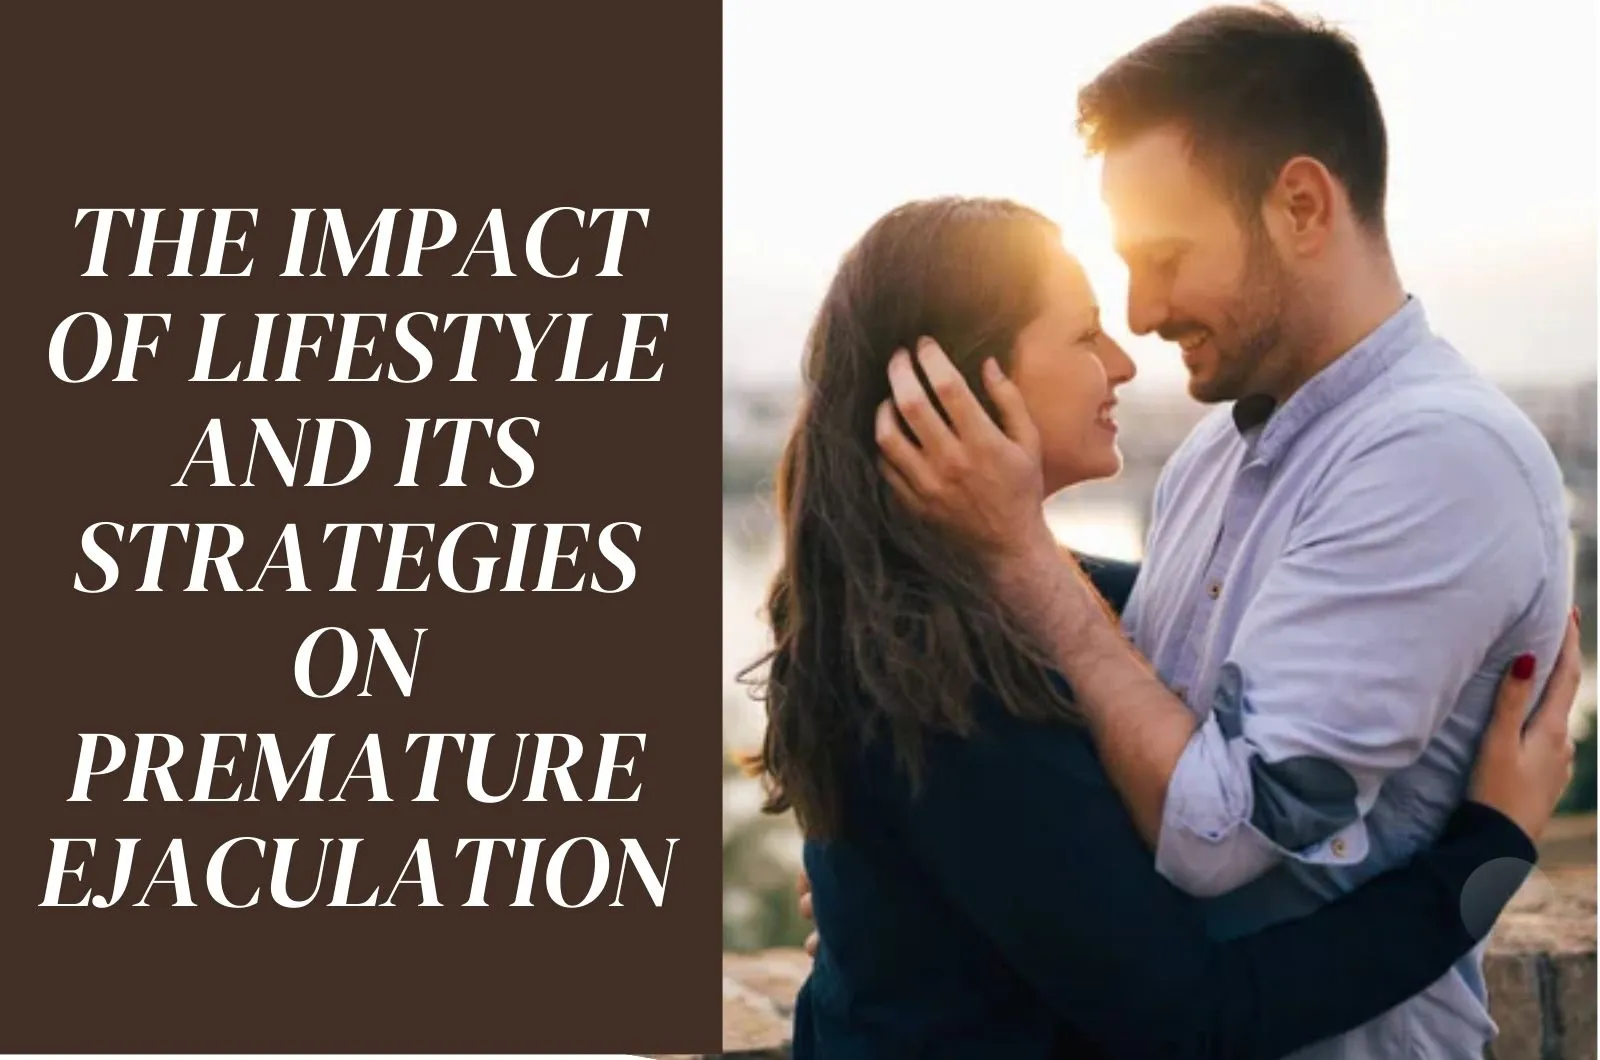 The impact of lifestyle and its strategies on premature ejaculation